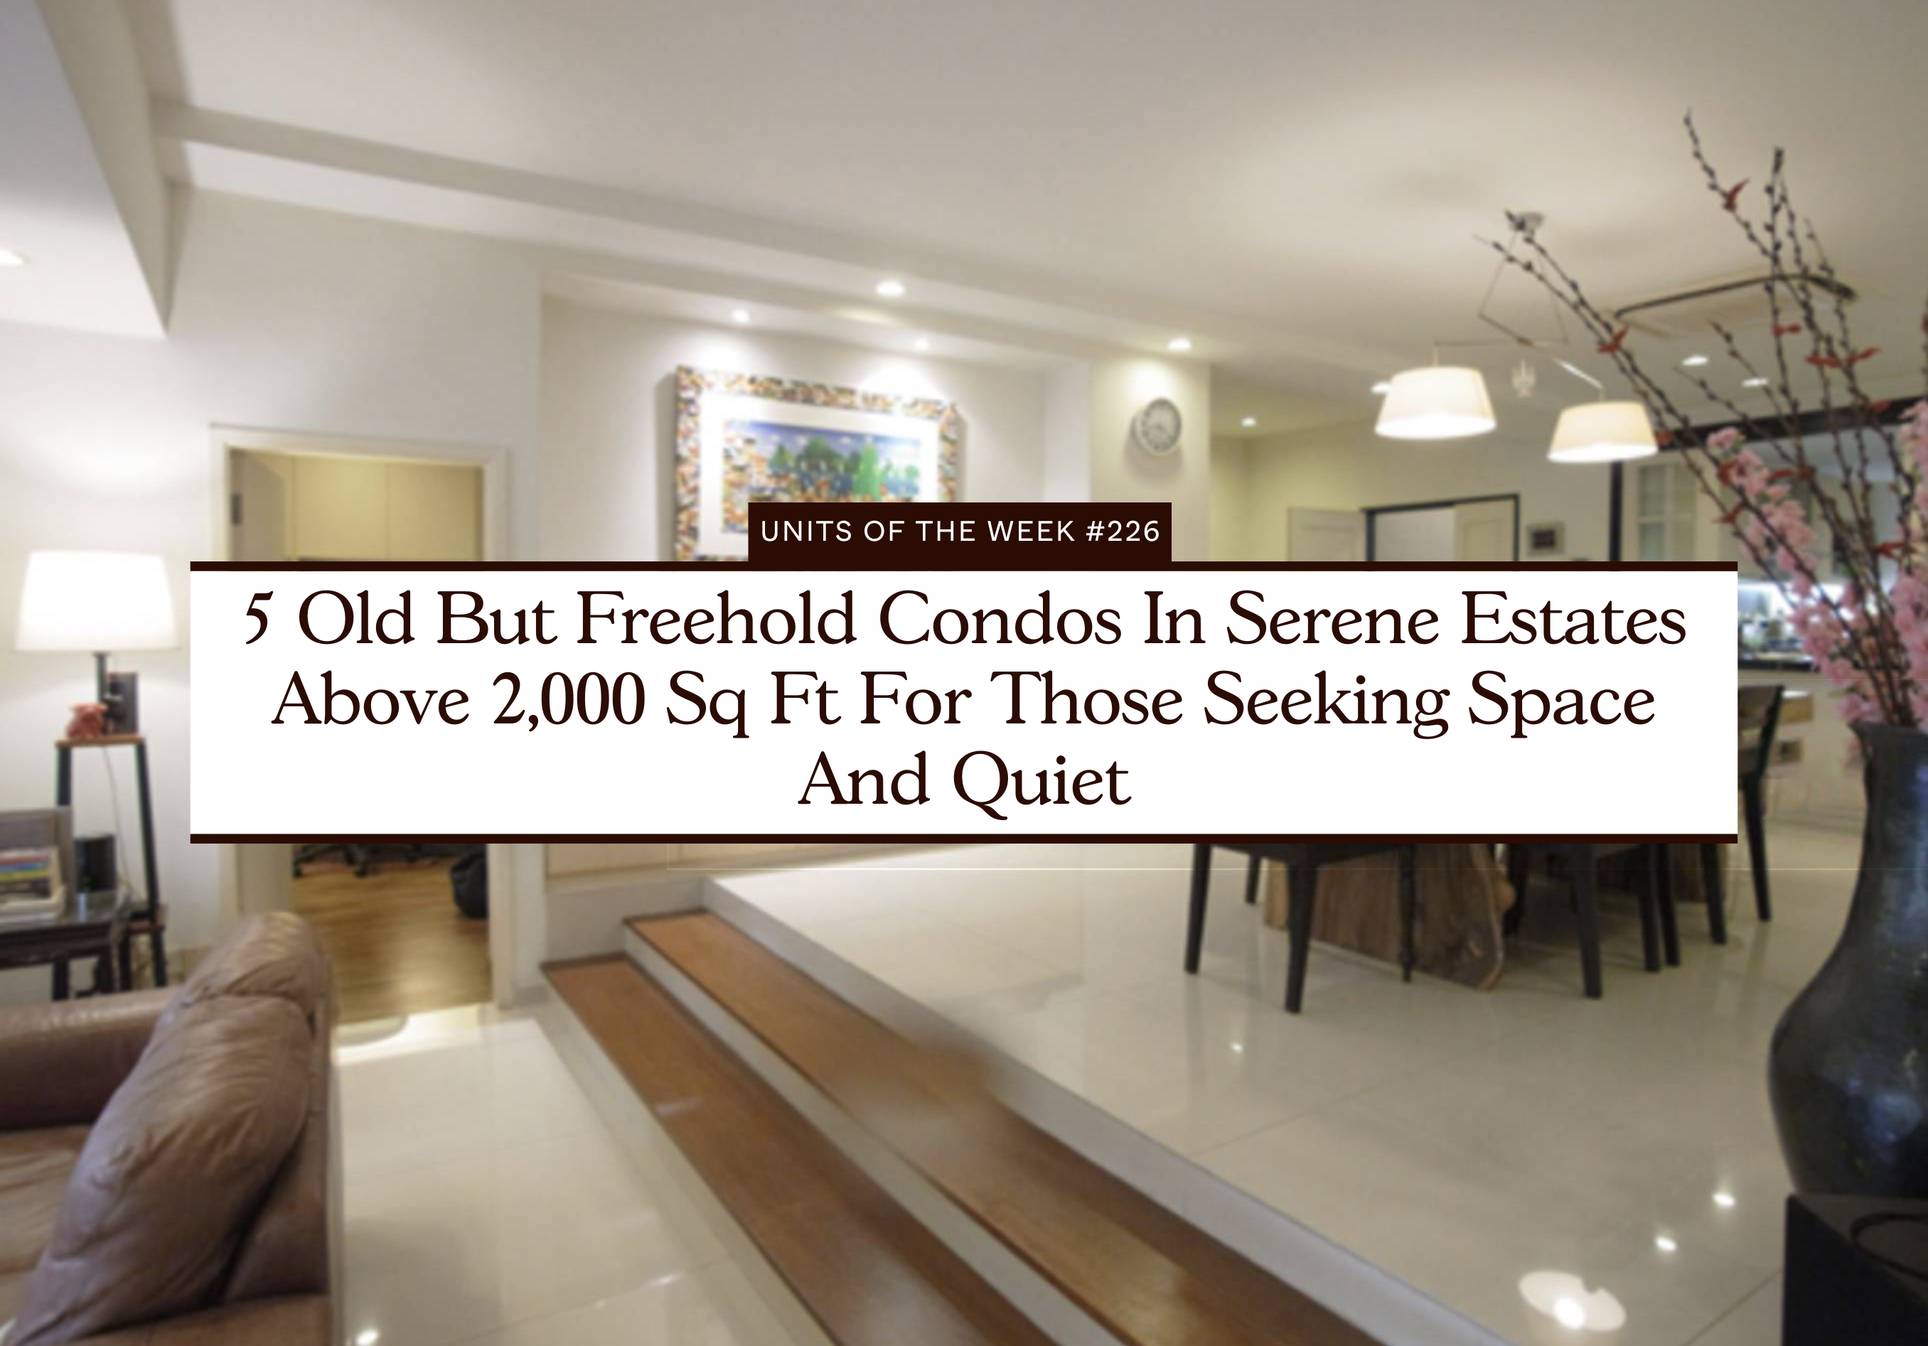 5 Old But Freehold Condos In Serene Estates Above 2000 Sq Ft For Those Seeking Space And Quiet